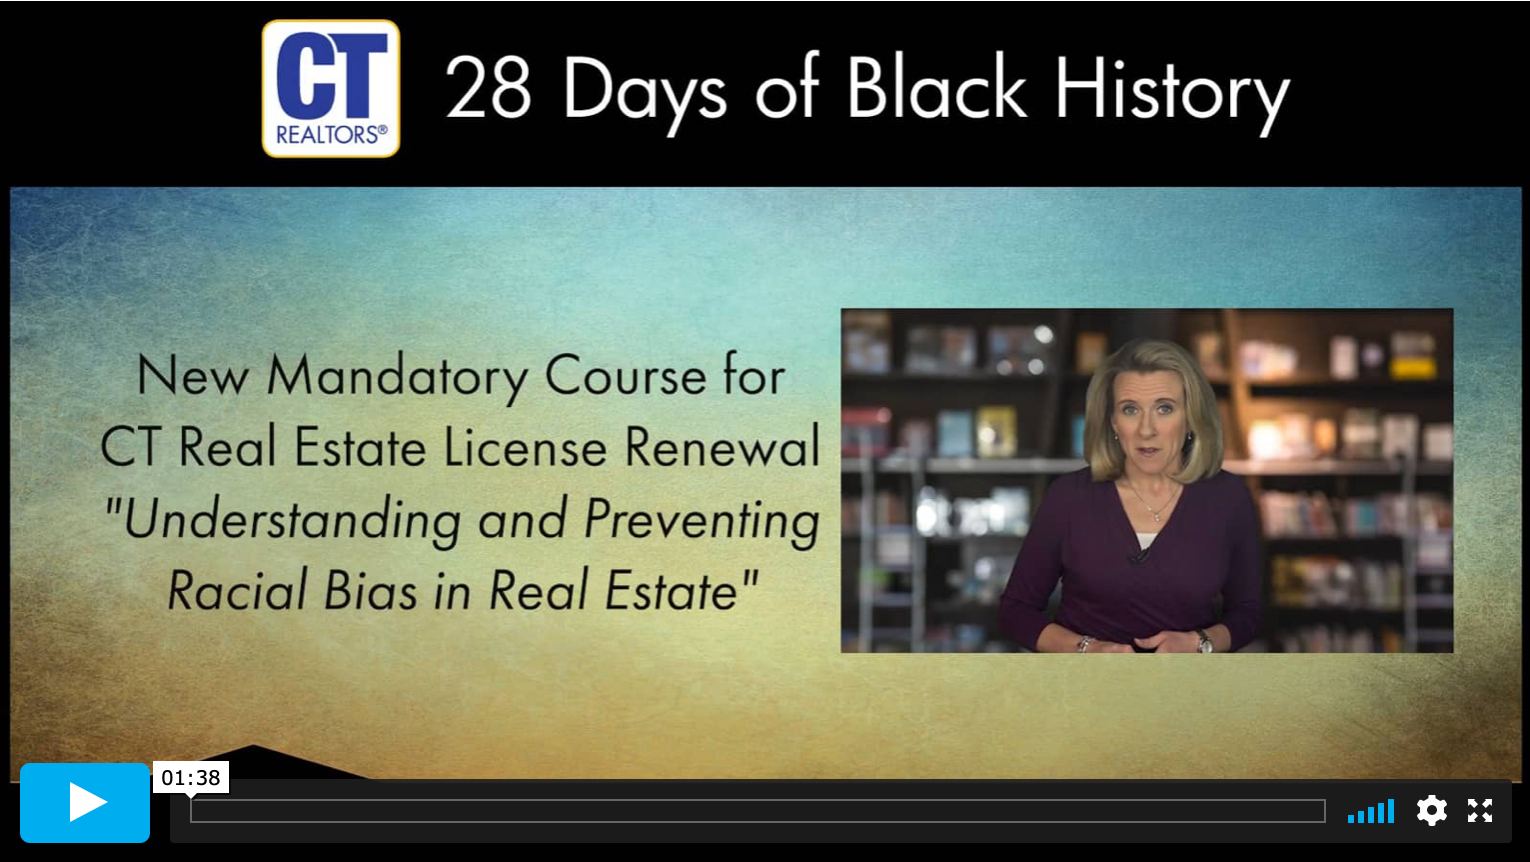 Video: Day 2 - Mandatory CE Course 